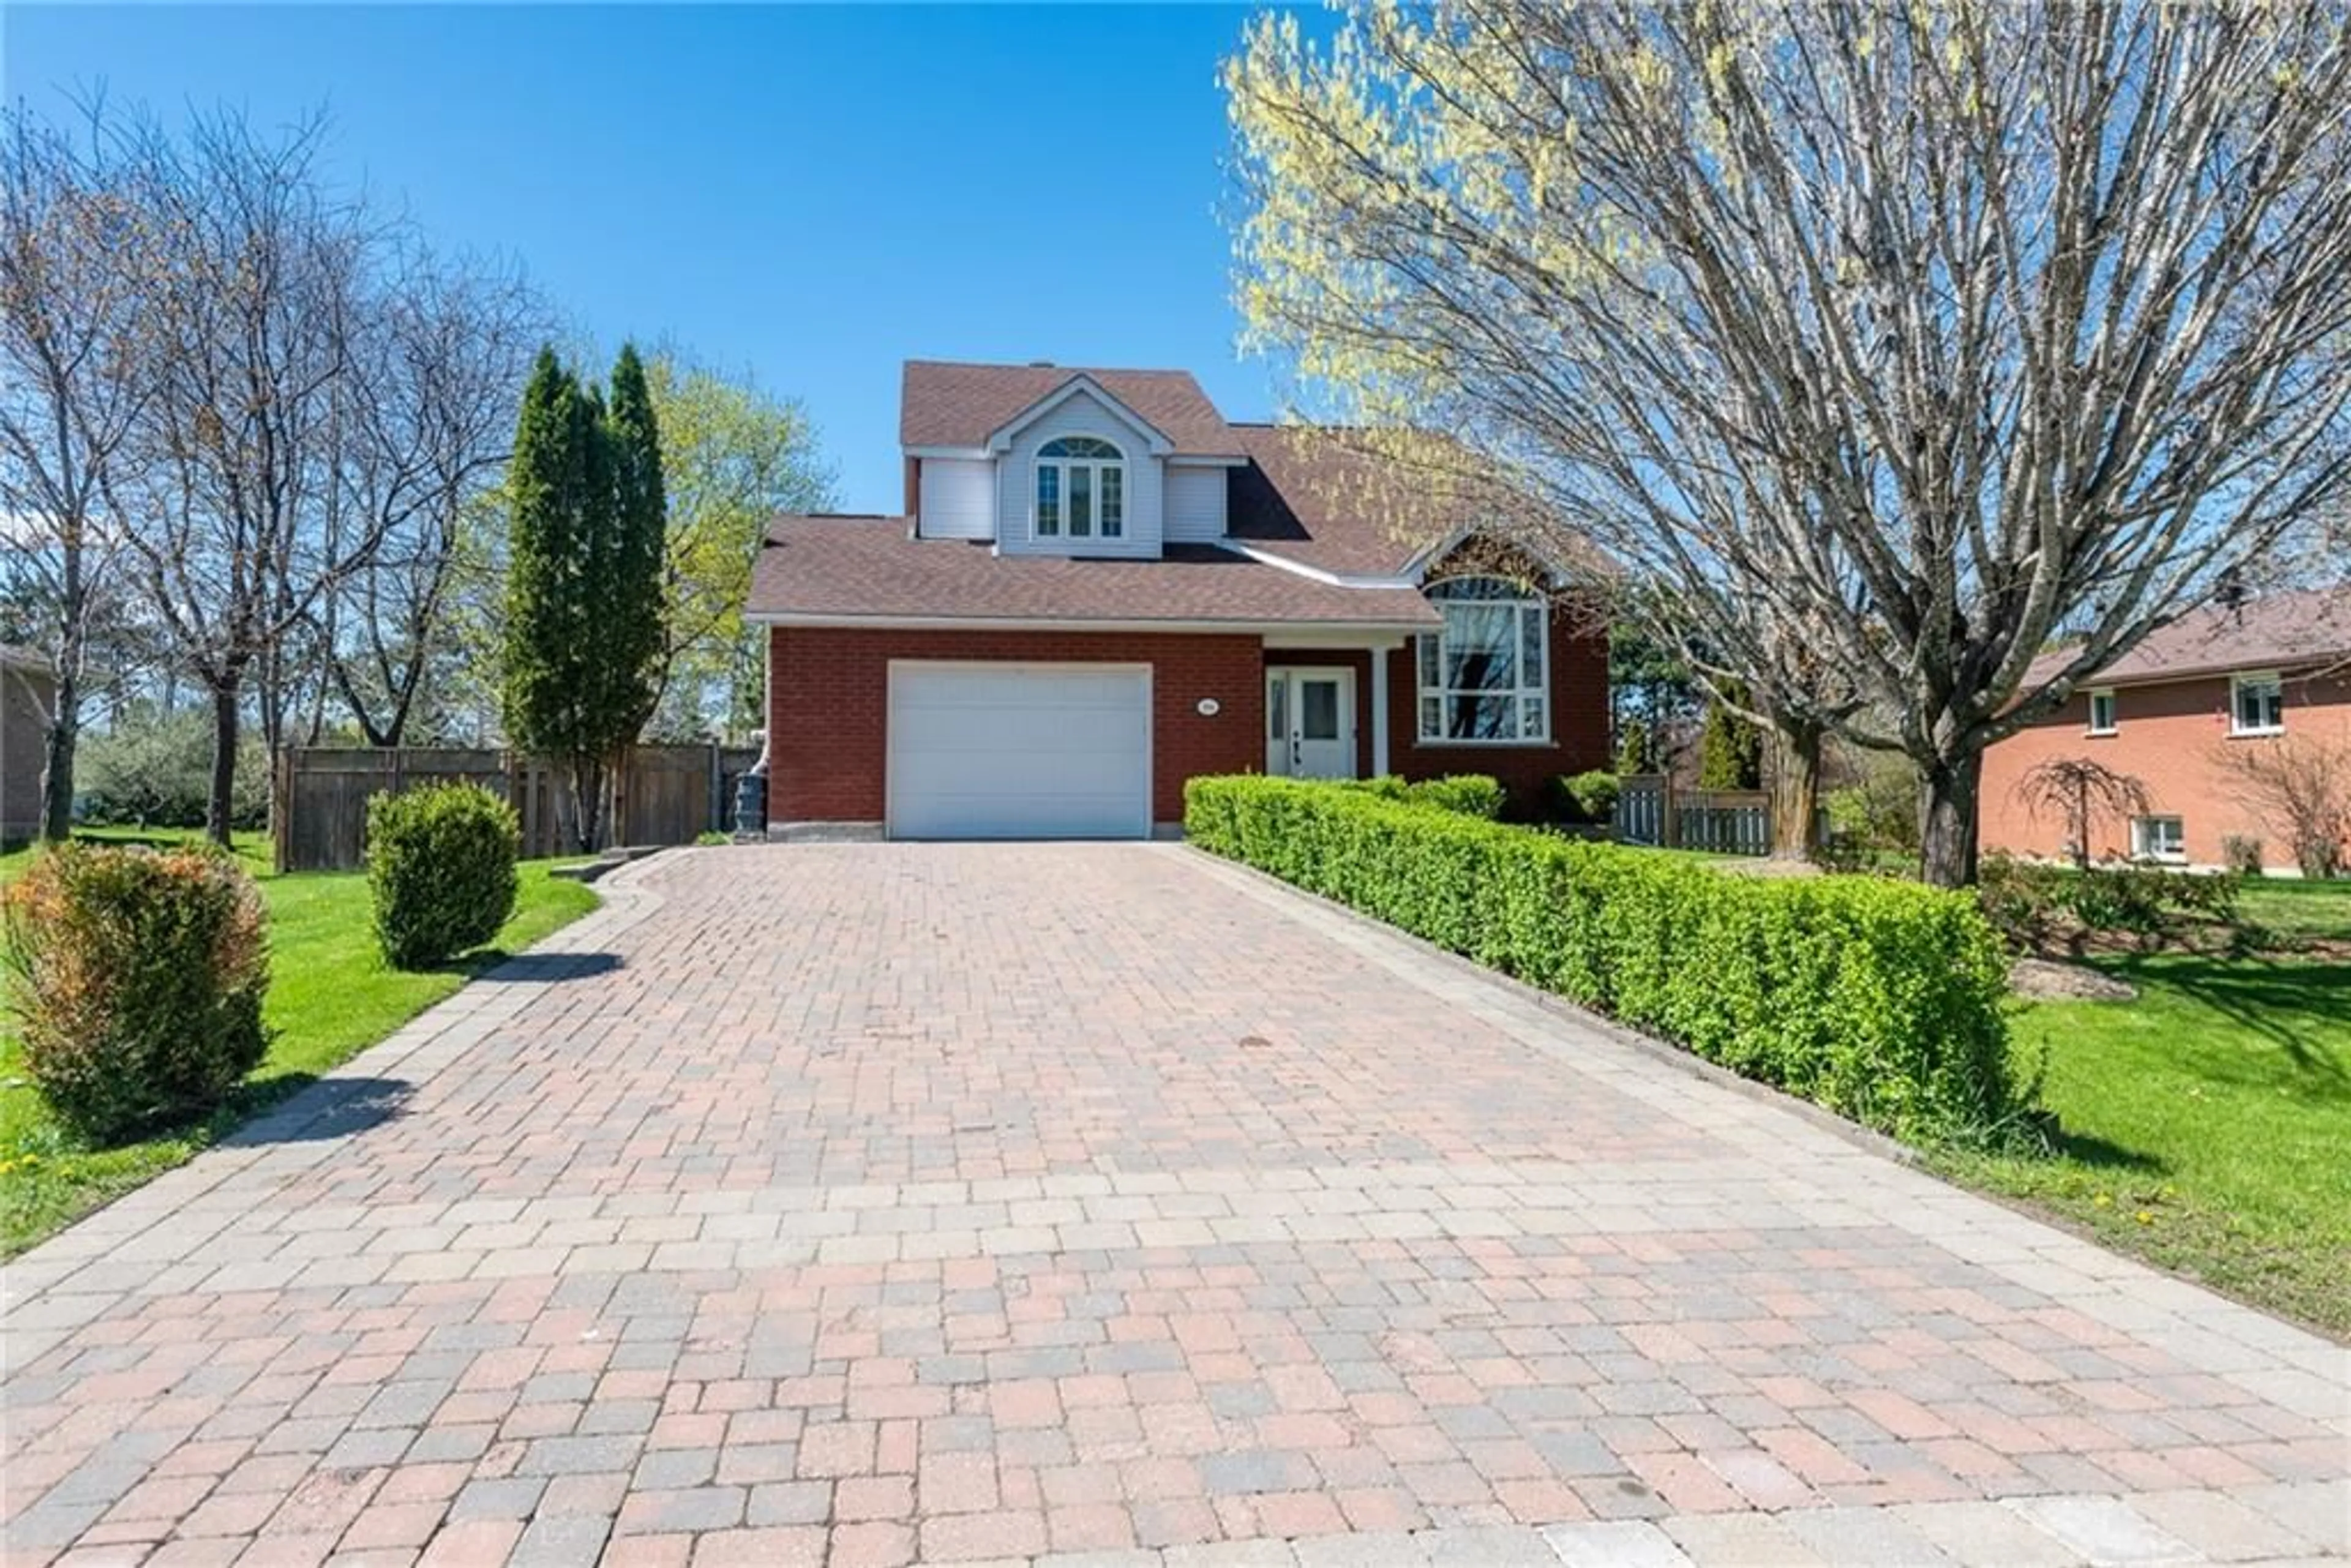 Home with brick exterior material for 184 PLEASANTVIEW Dr, Pembroke Ontario K8B 1B6